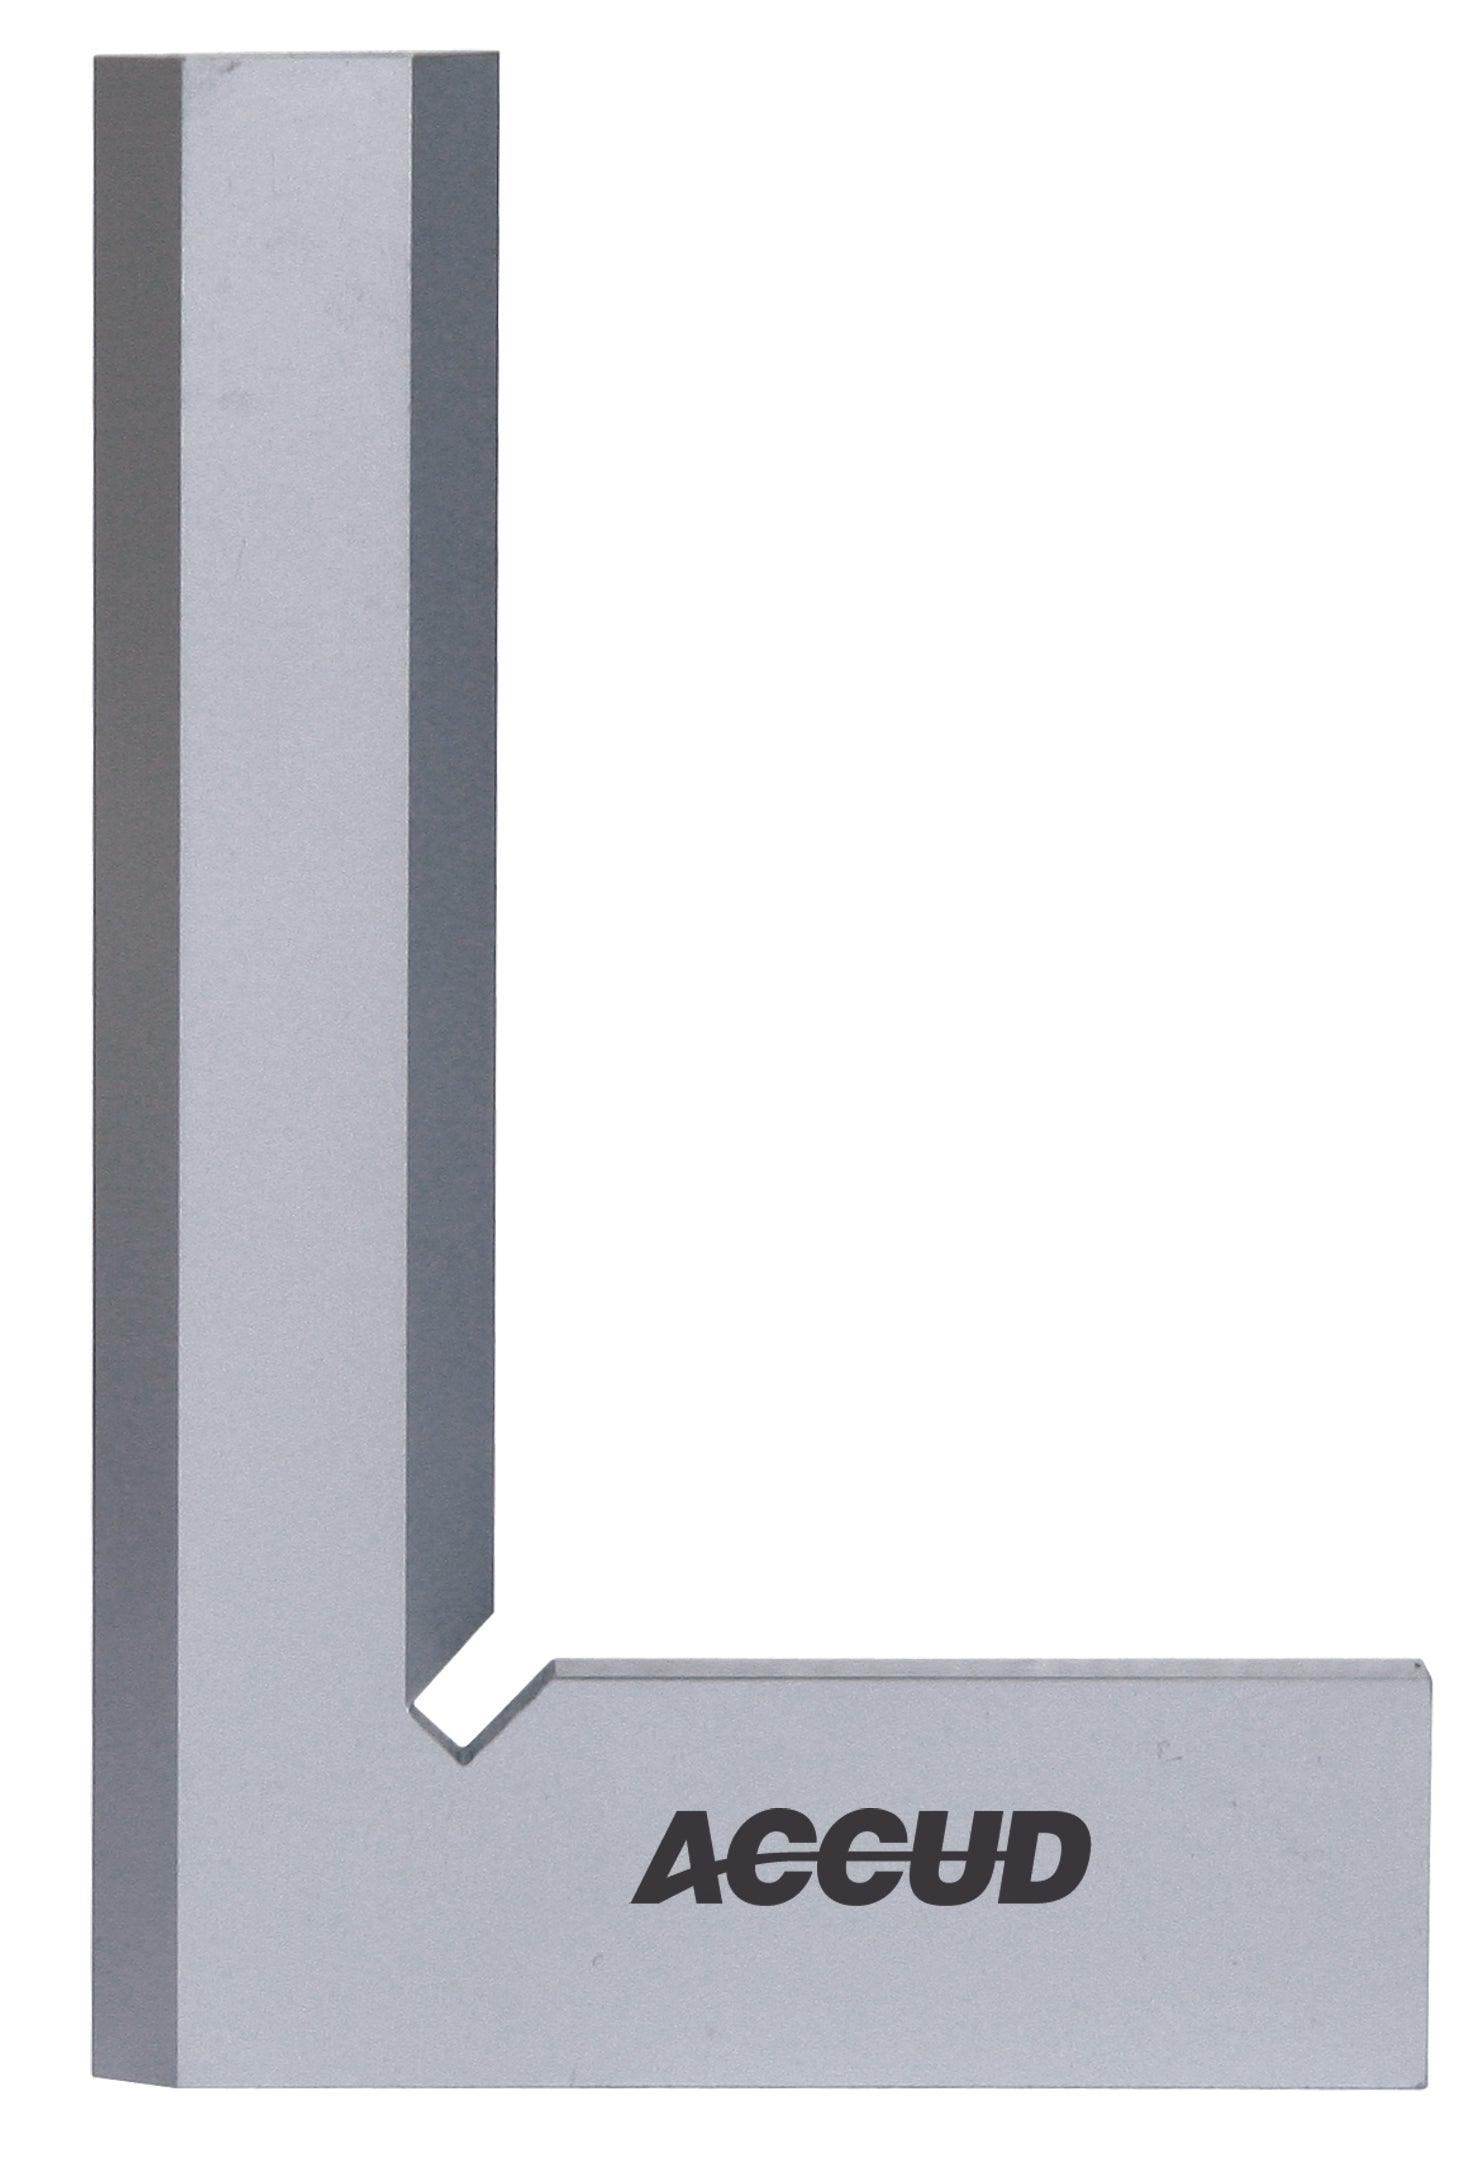 ACCUD | Beveled Edge Square 50X40Mm | 832-002-00 Power Tool Services